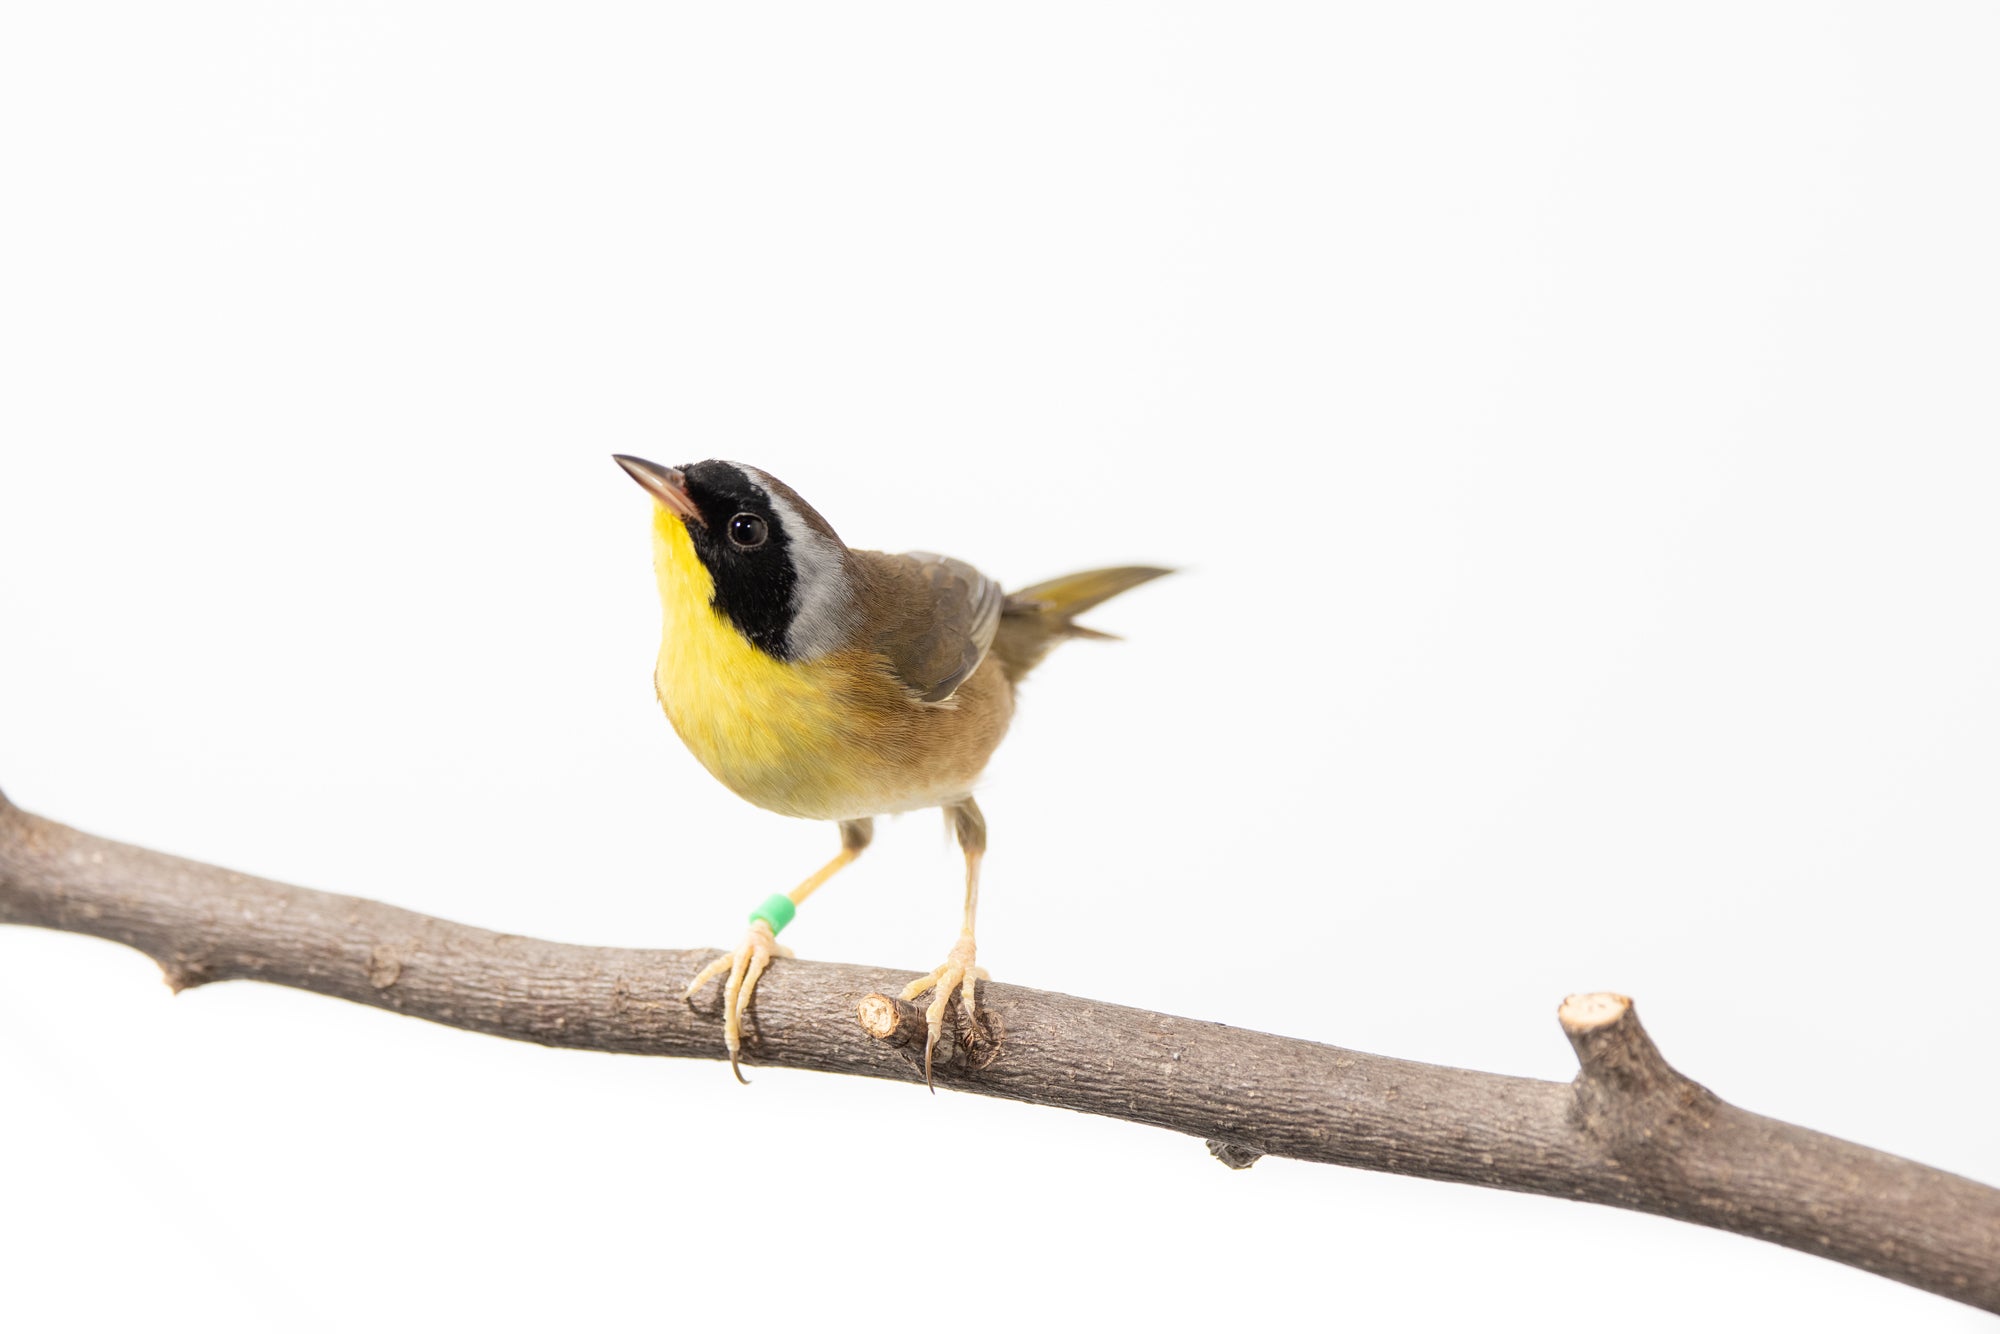 A male common yellowthroat (a small migratory bird) perched on a branch. It has mostly yellow feathers with black-and-white face feathers, and a green band on its right leg.